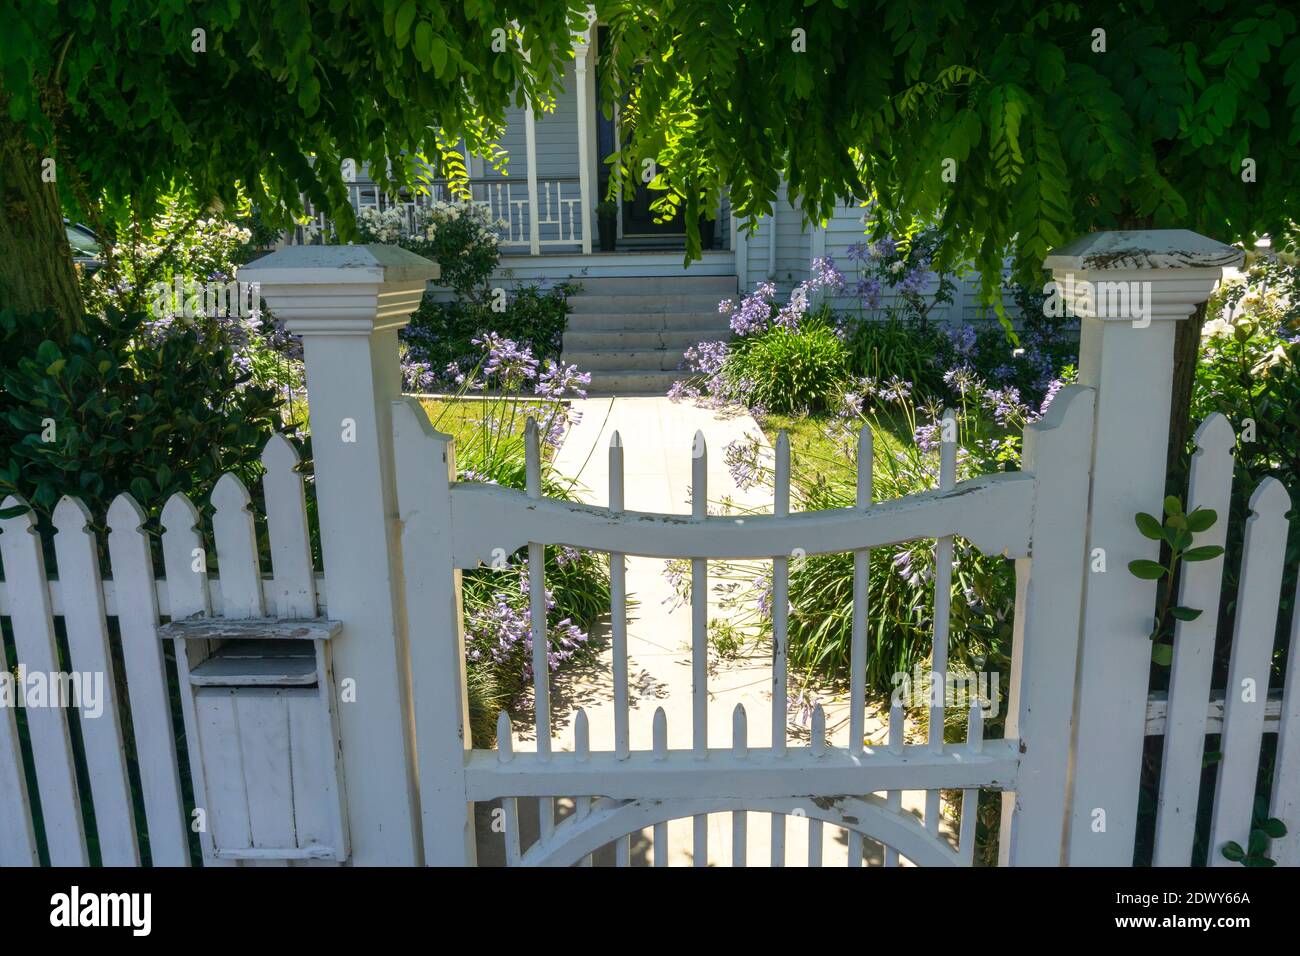 Gate and path leading to front door through old-world garden. Stock Photo